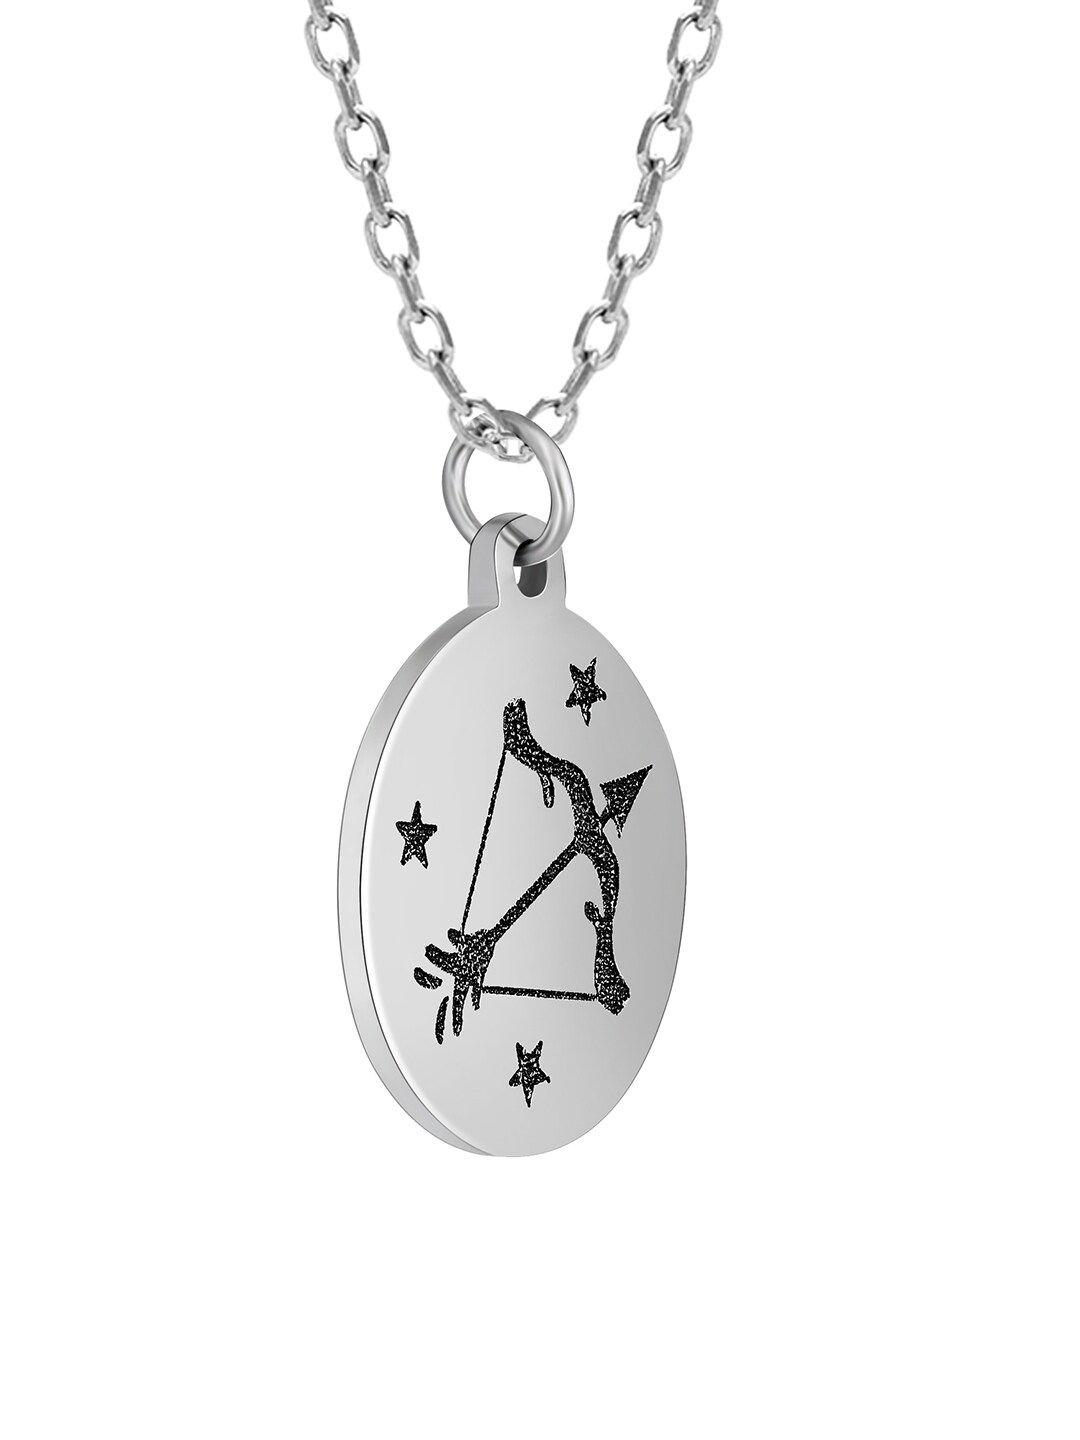 giva 925 sterling silver rhodium-plated silver-toned & black sagittarius zodiac charm pendant with chain